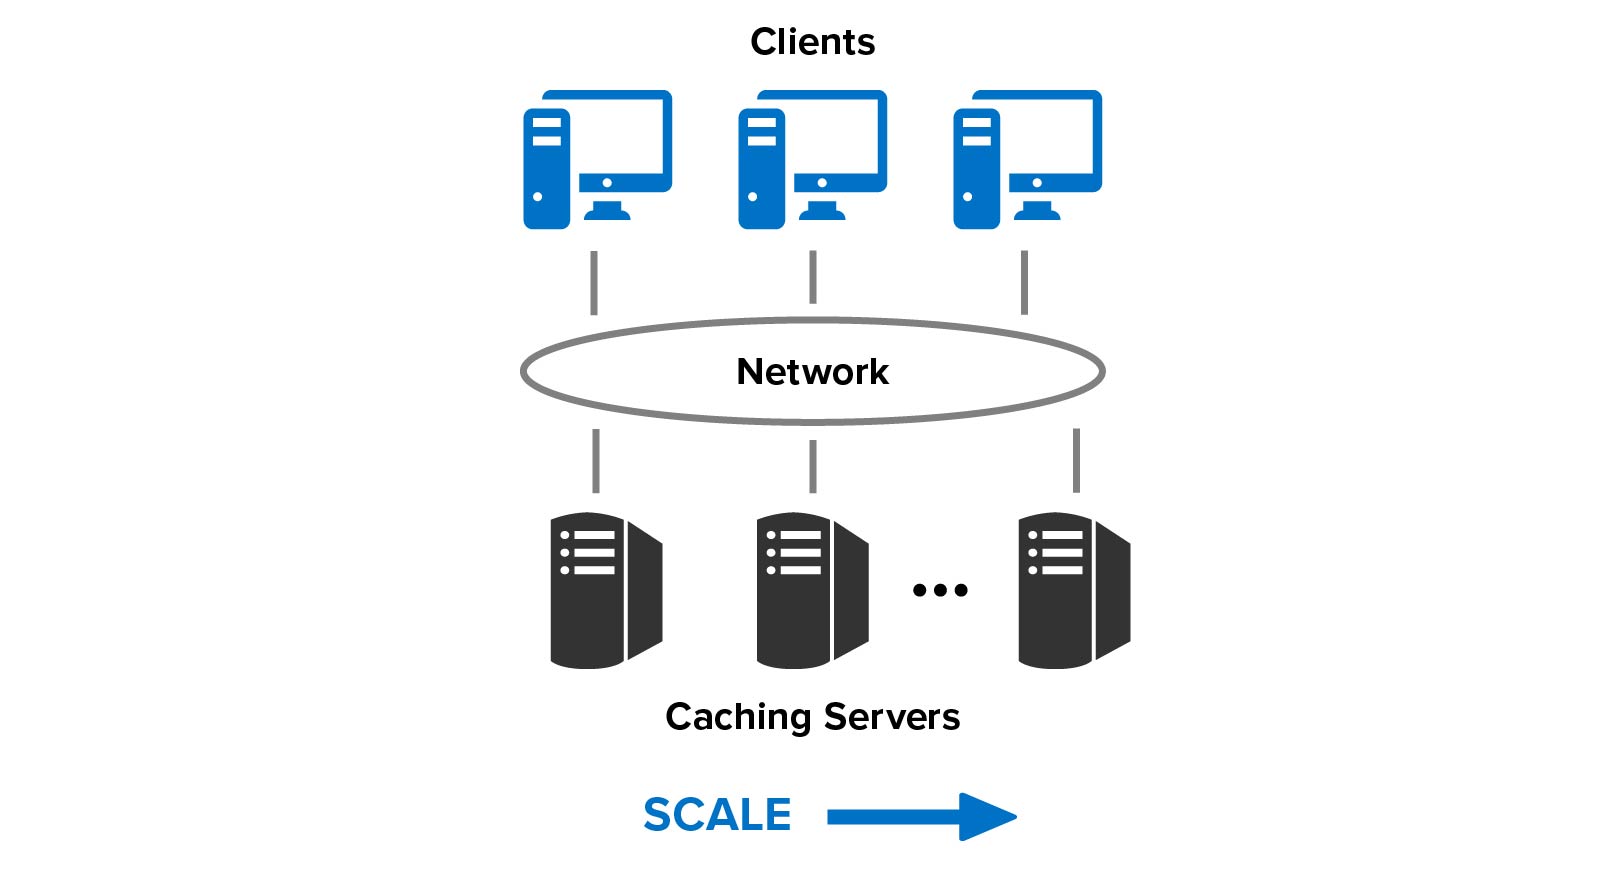 Scalable throughput in a distributed system handles a growing (not fixed) workload.